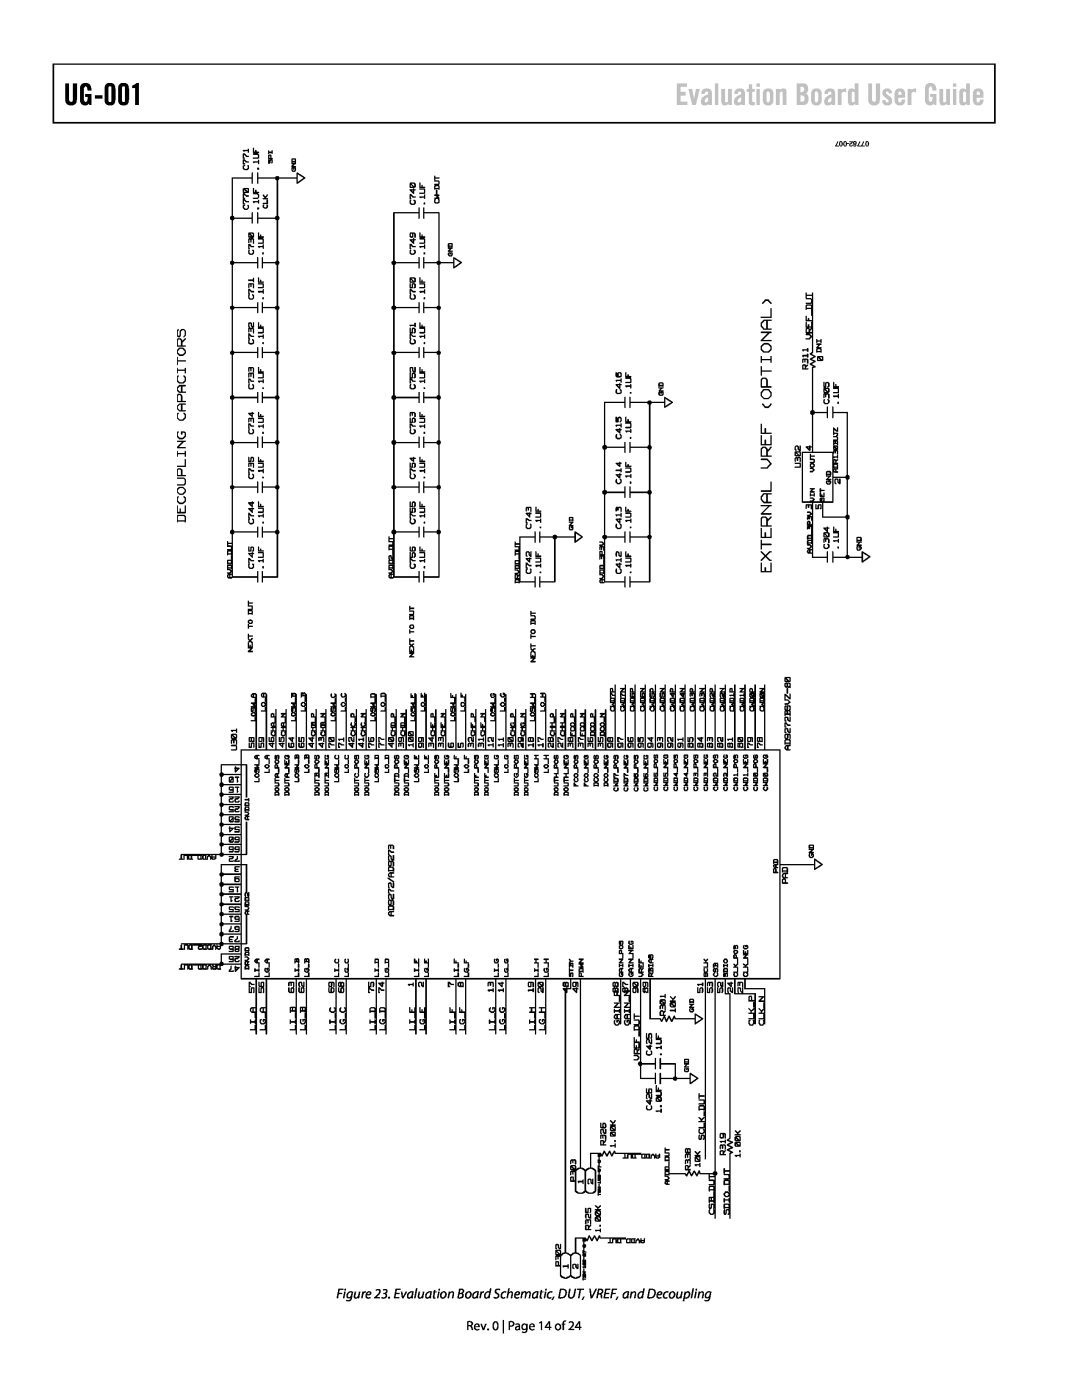 Analog Devices AD9272 UG-001, Evaluation Board User Guide, Evaluation Board Schematic, DUT, VREF, and Decoupling, Rev. 0 